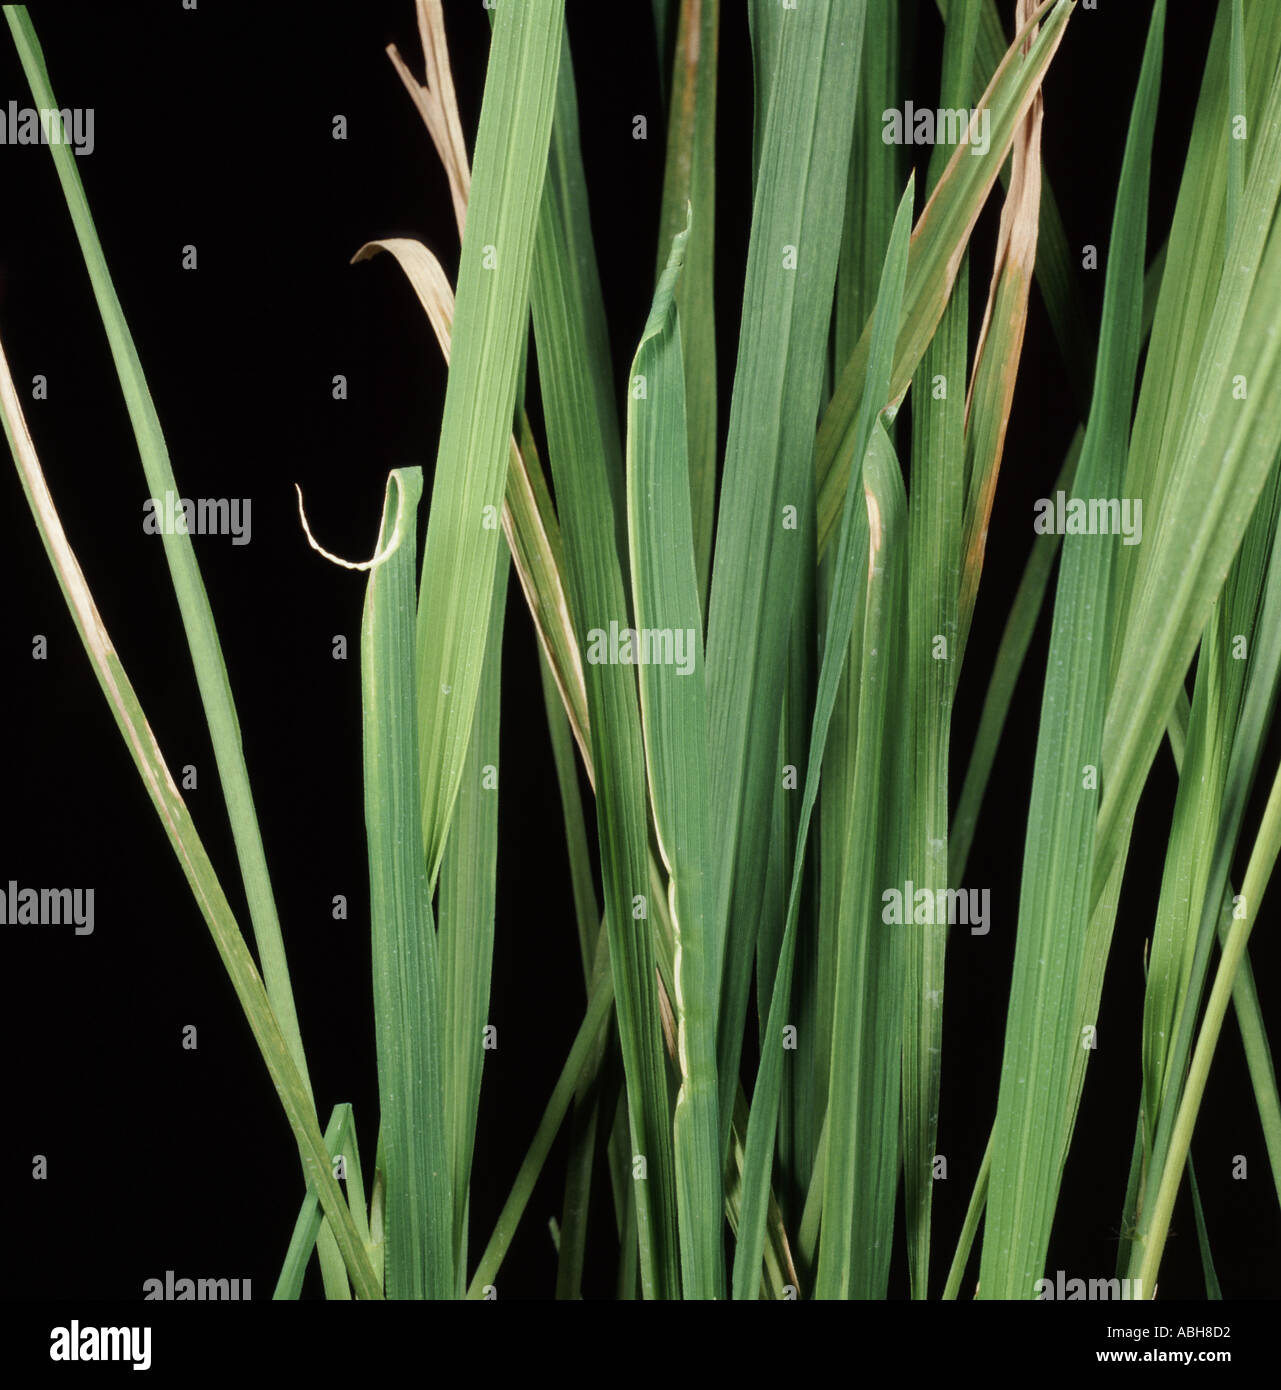 Ragged stunt virus RSV on an infected rice plant Thailand Stock Photo